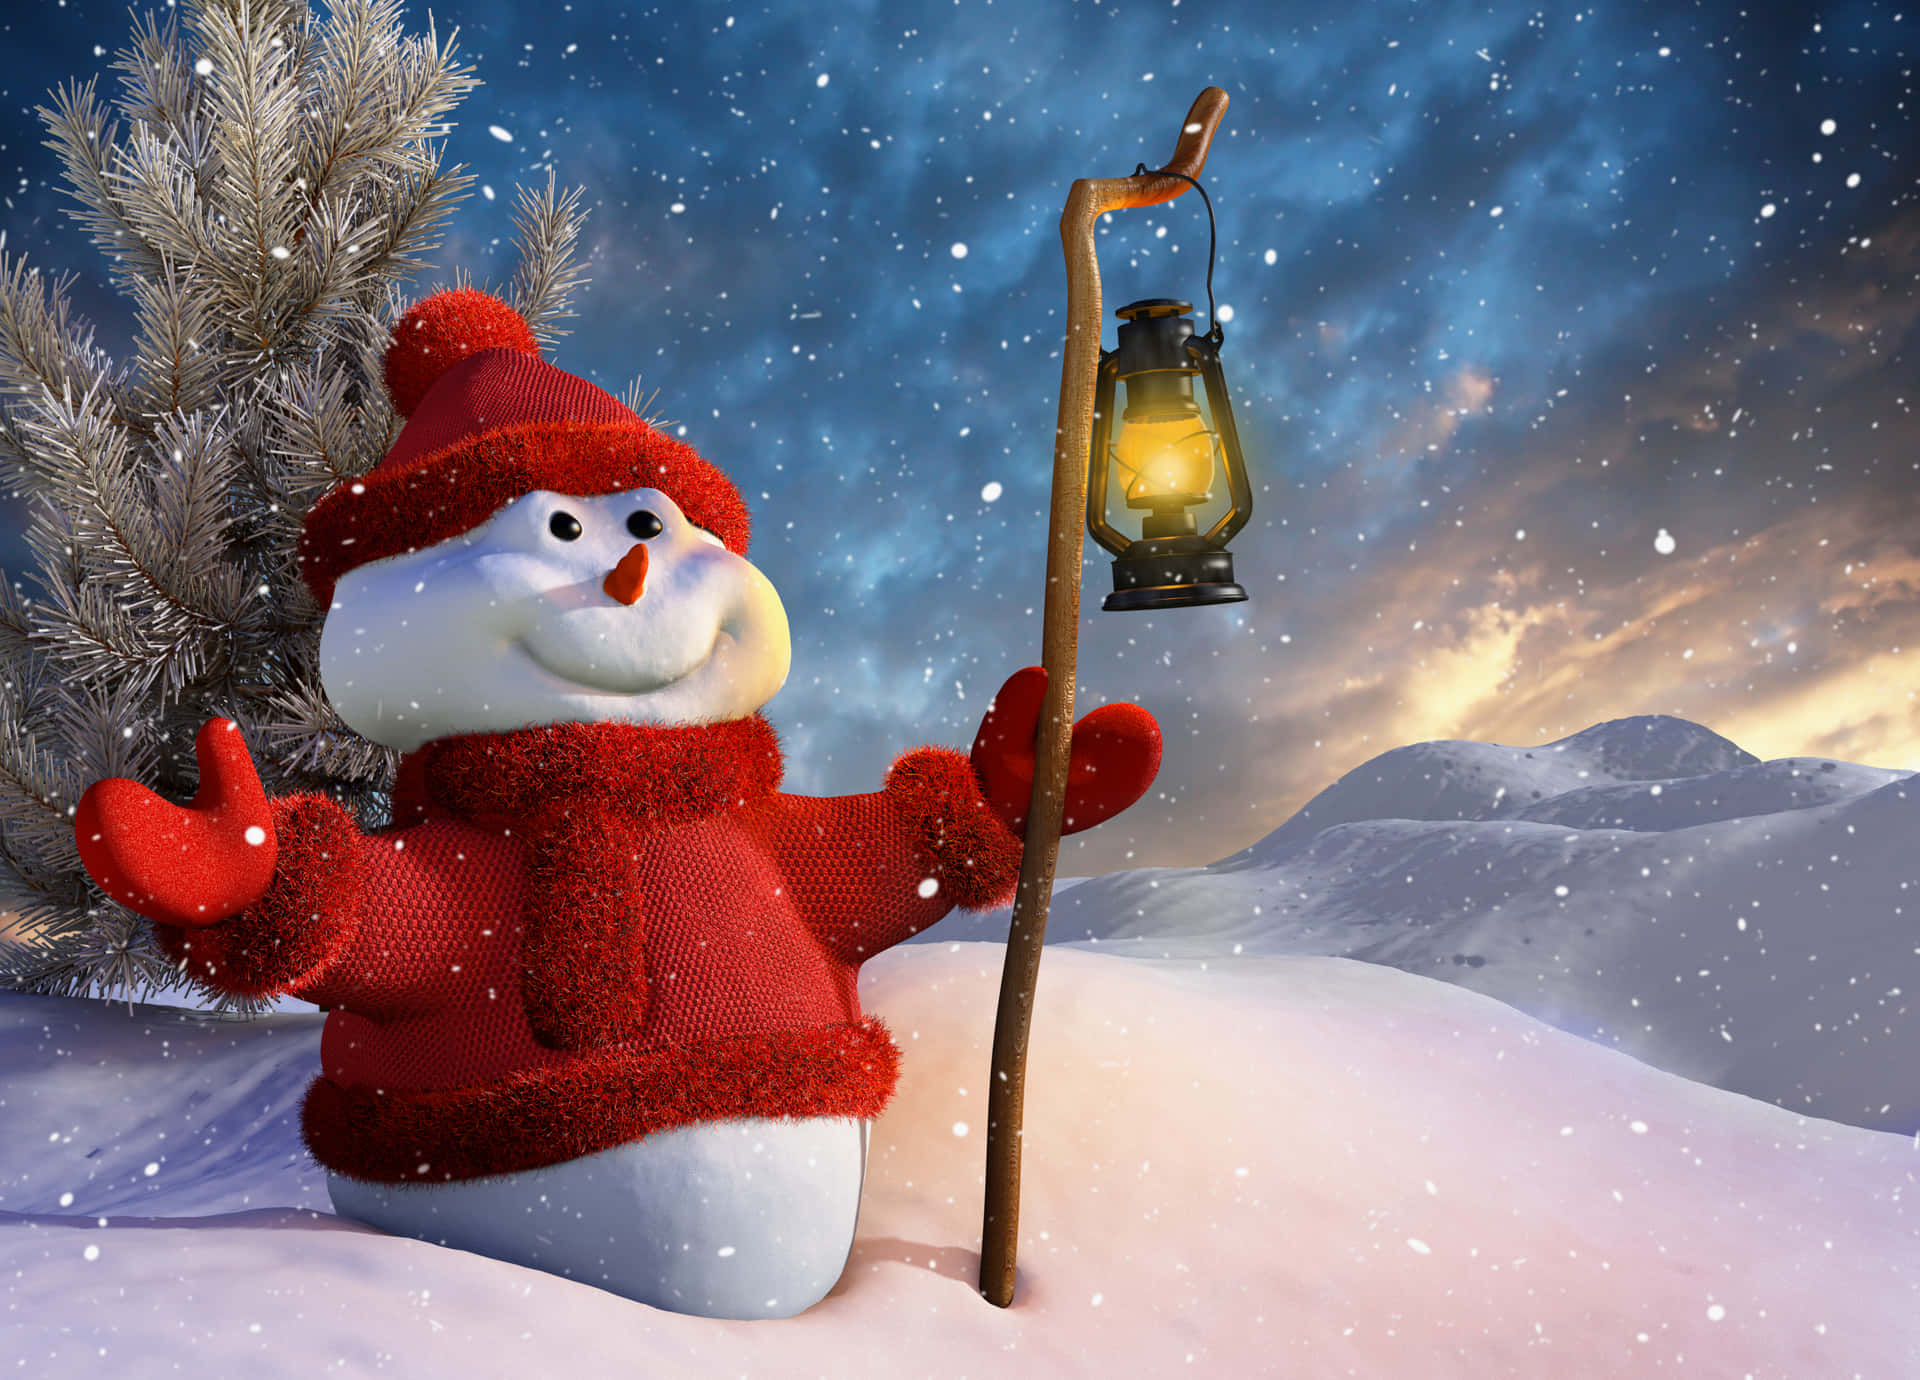 Download Enjoy the winter season with this magical snowman ...